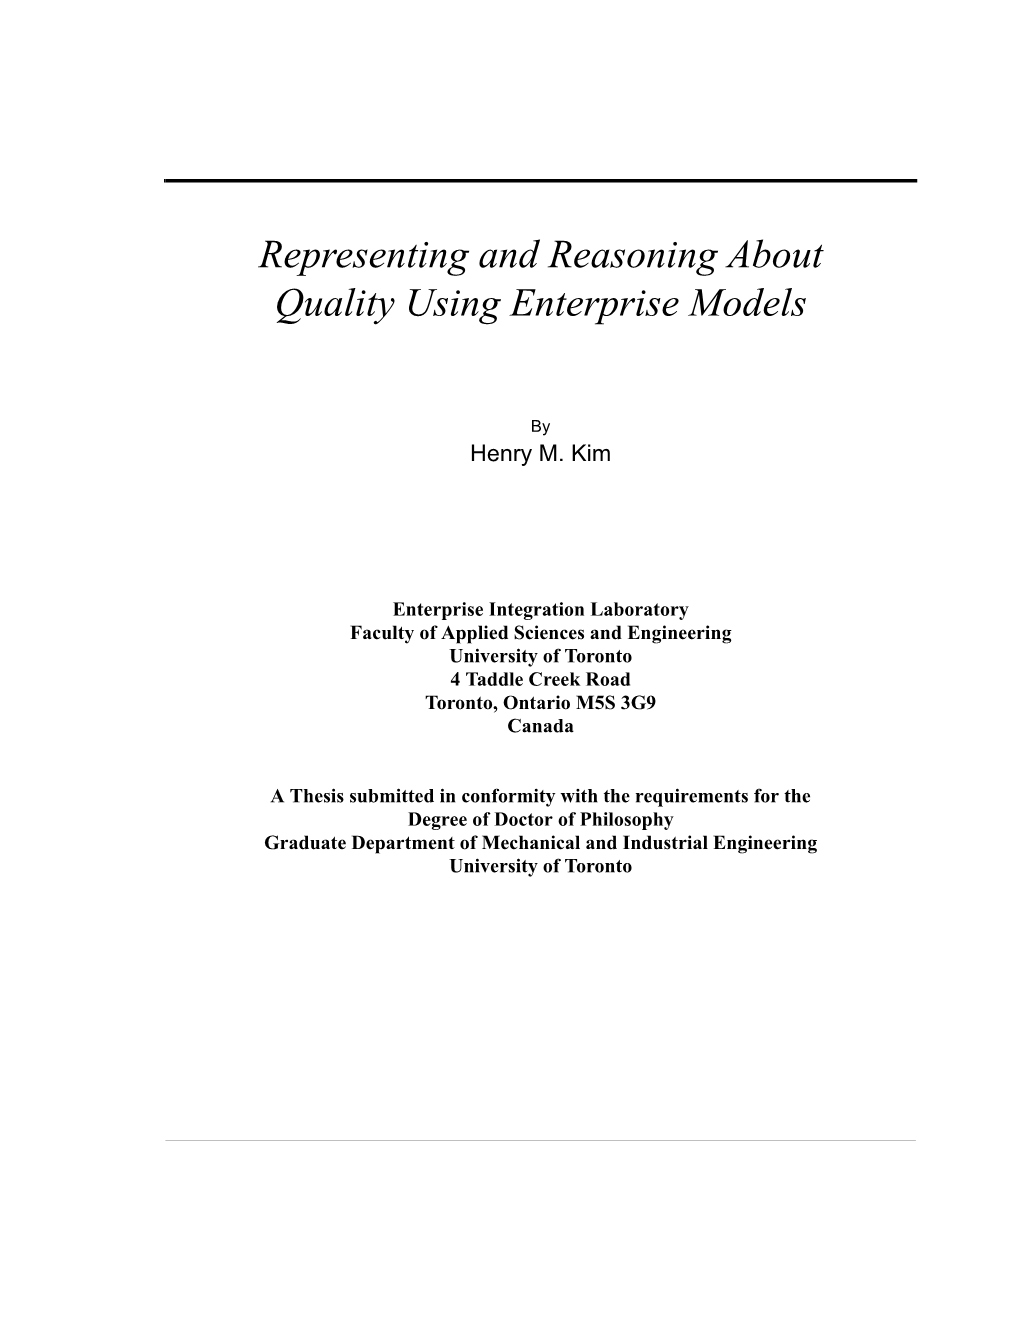 Representing and Reasoning About Quality Using Enterprise Models